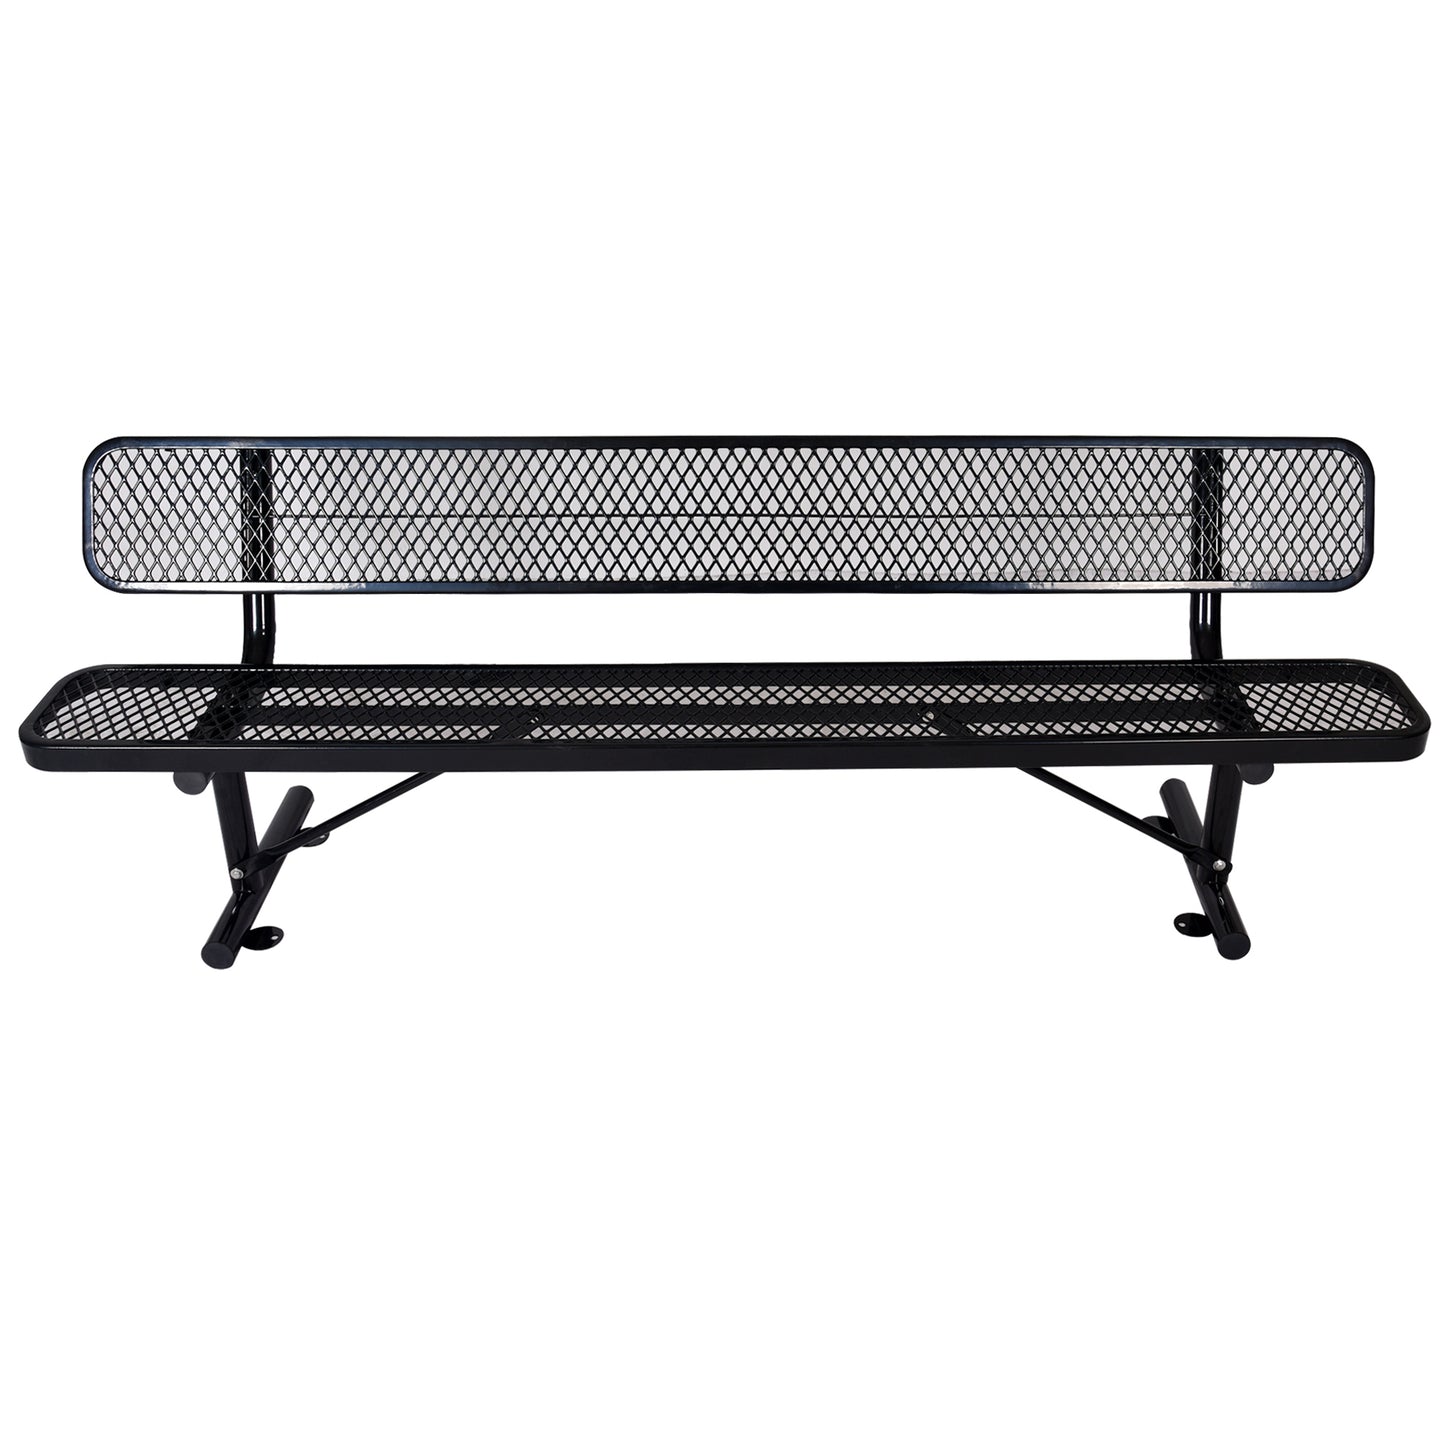 8 ft. Outdoor Steel Bench with Backrest BLack